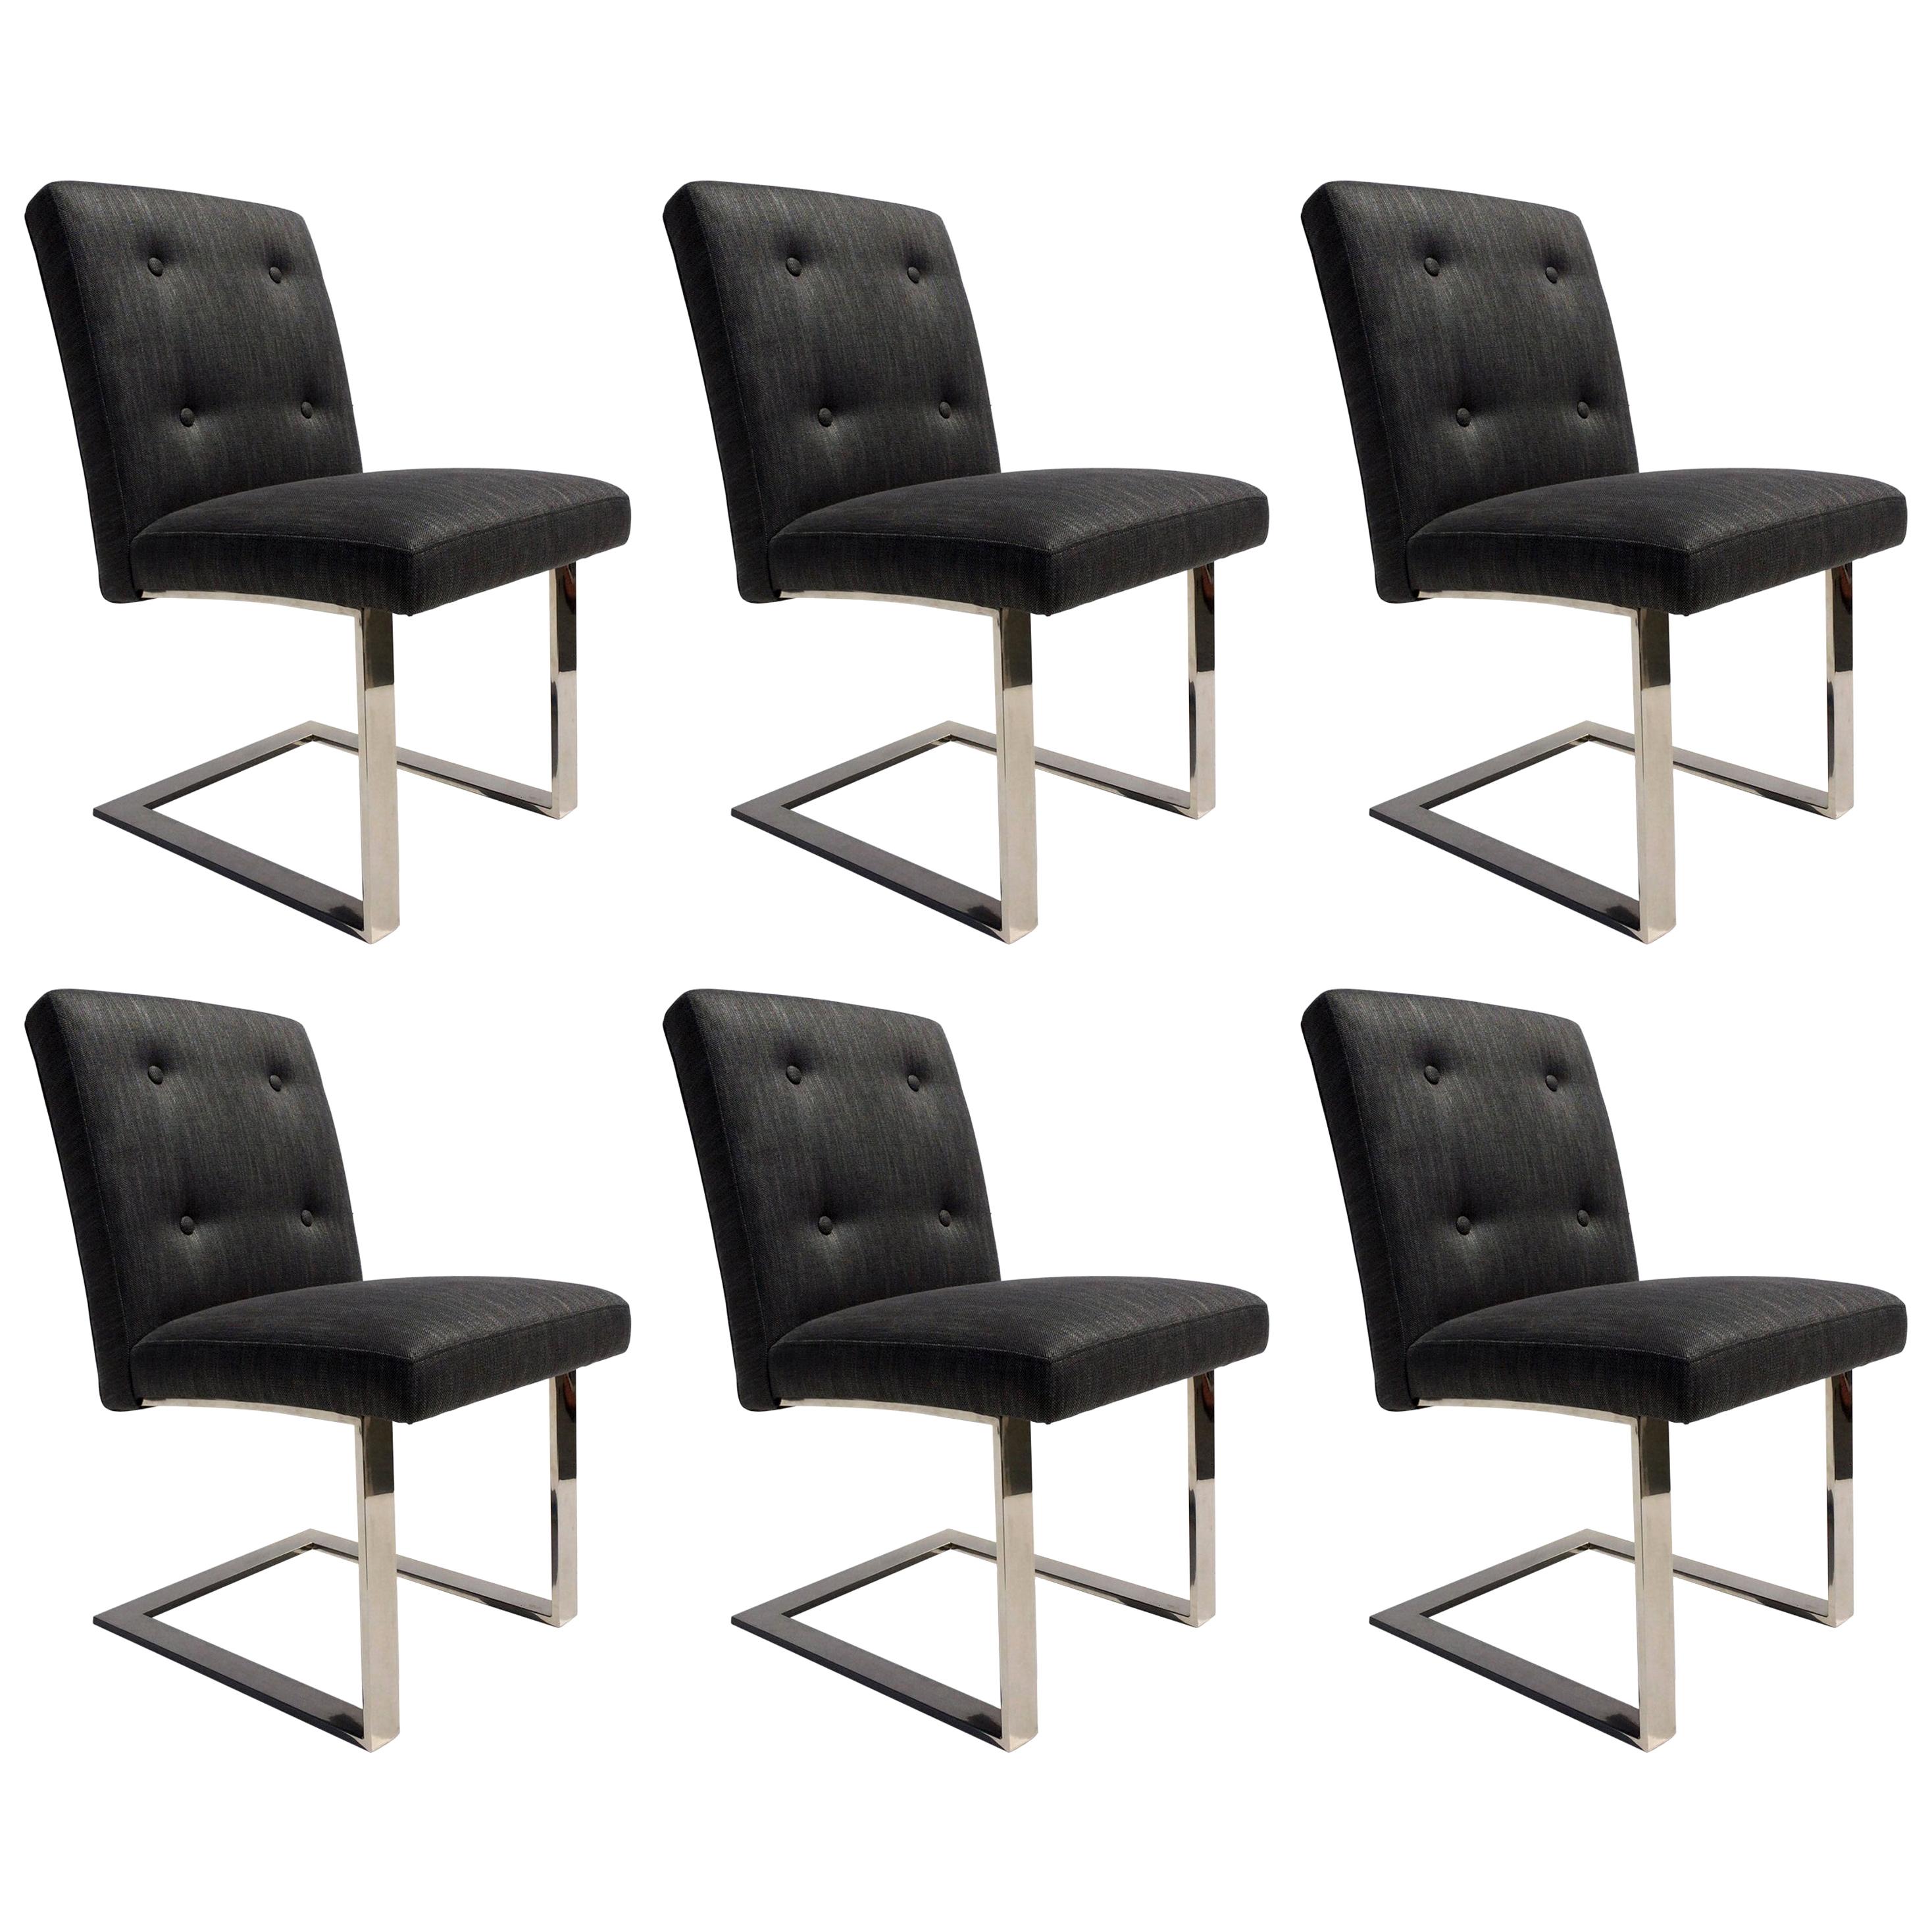 Set of Six Dining Chairs by Paul Evans for Directional, Mid-Century Modern